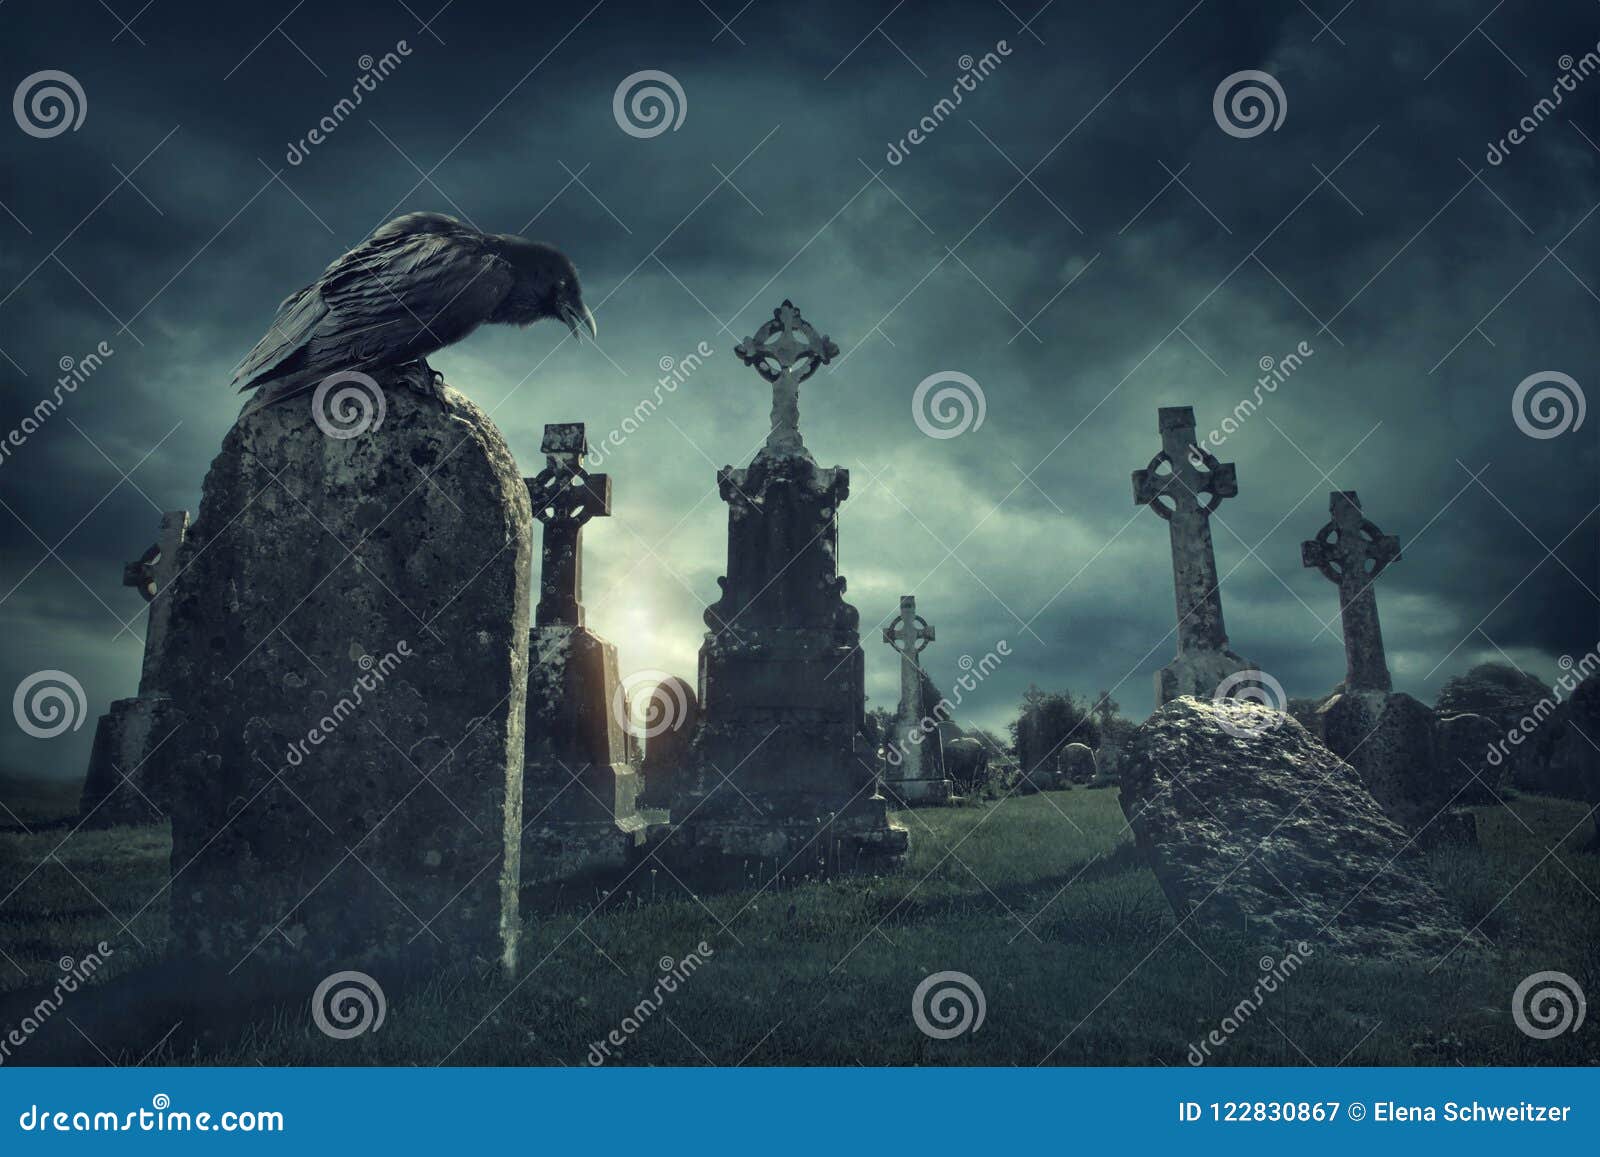 spooky old graveyard and a bird